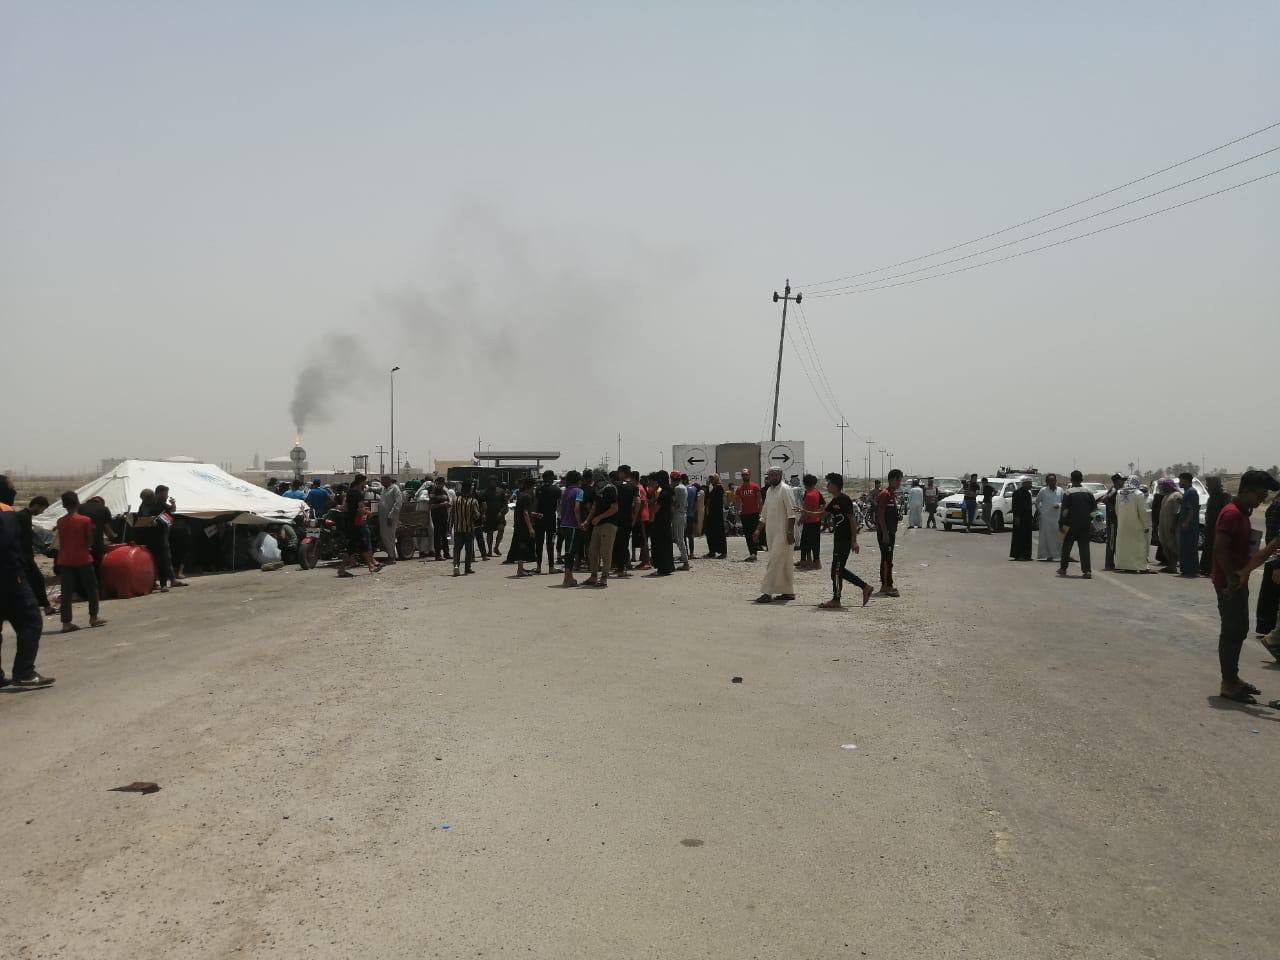 Maysan - Baghdad road reopened, local official confirms 